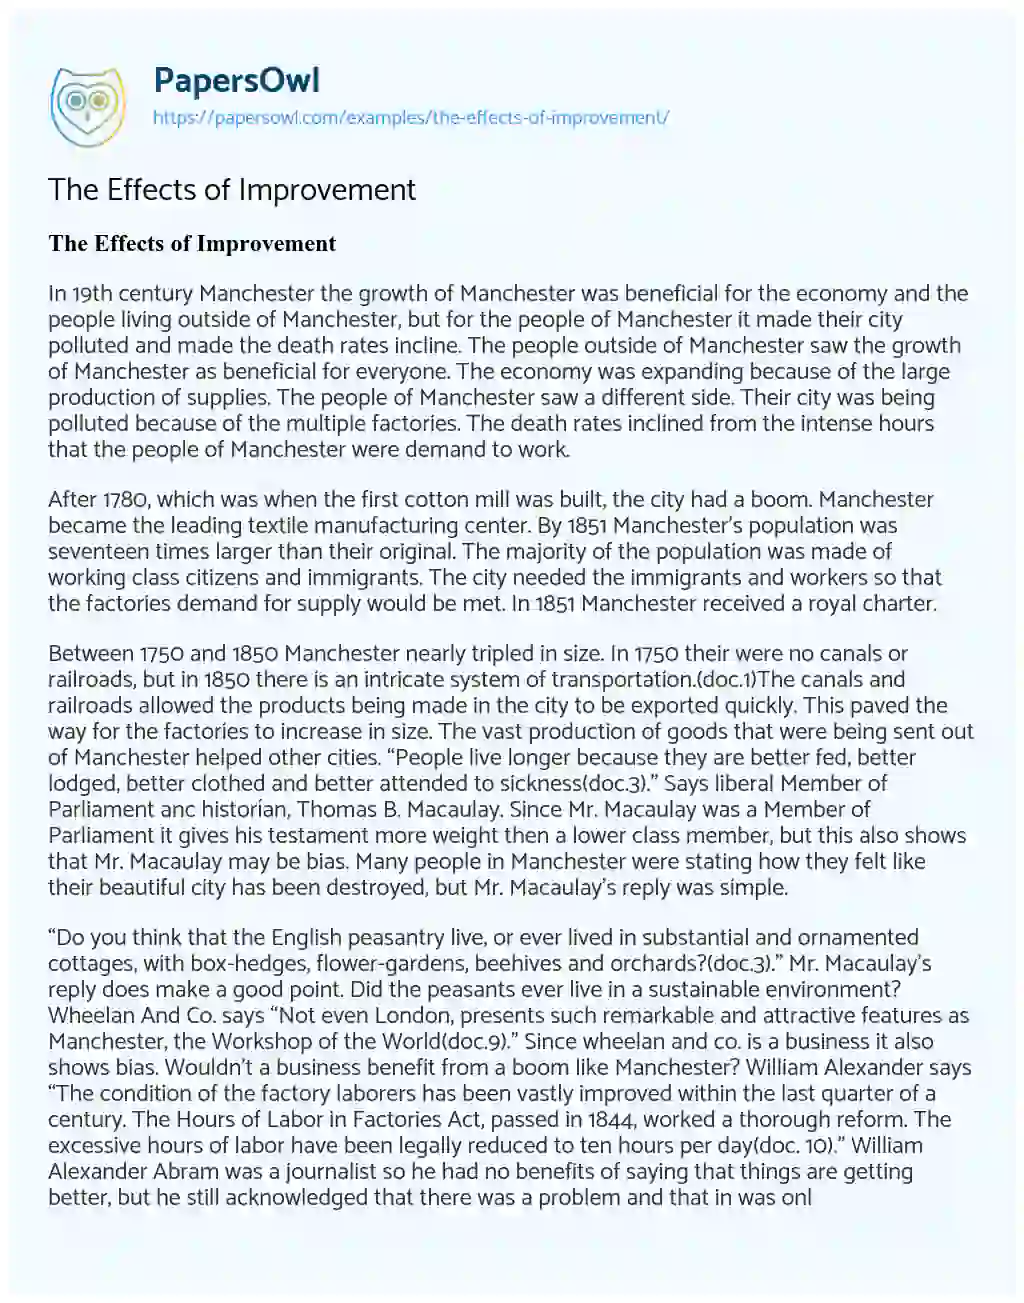 Essay on The Effects of Improvement